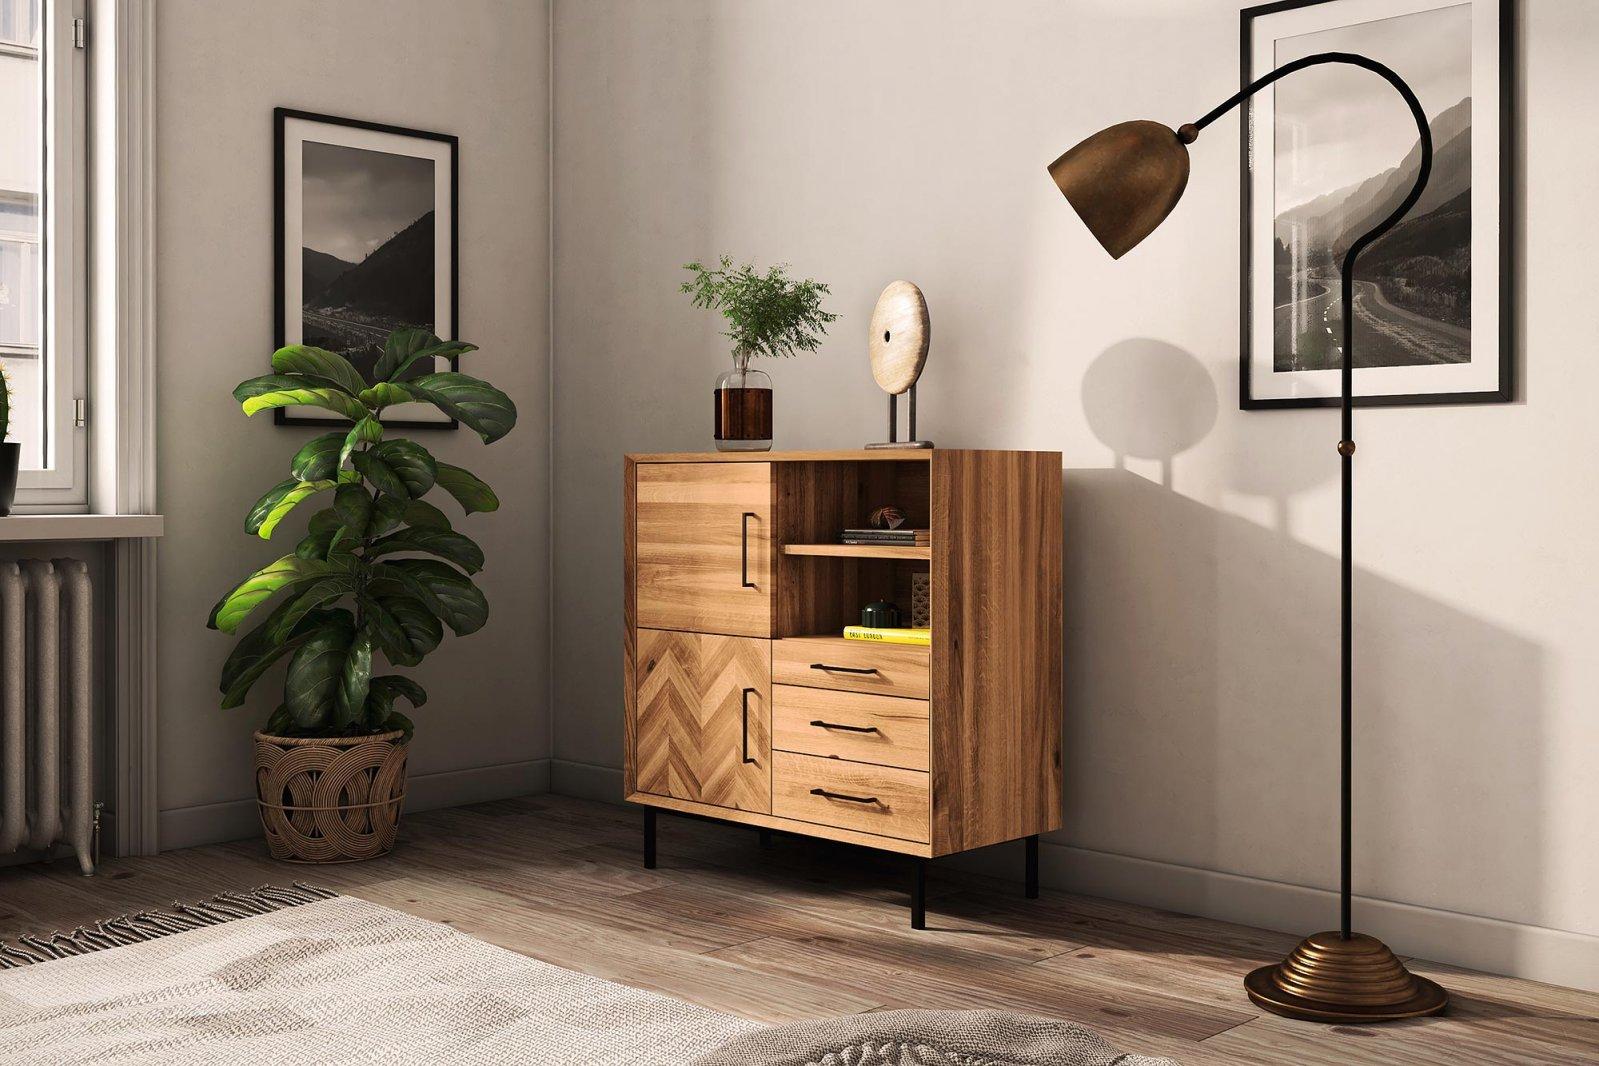 High chest of drawers ABIES